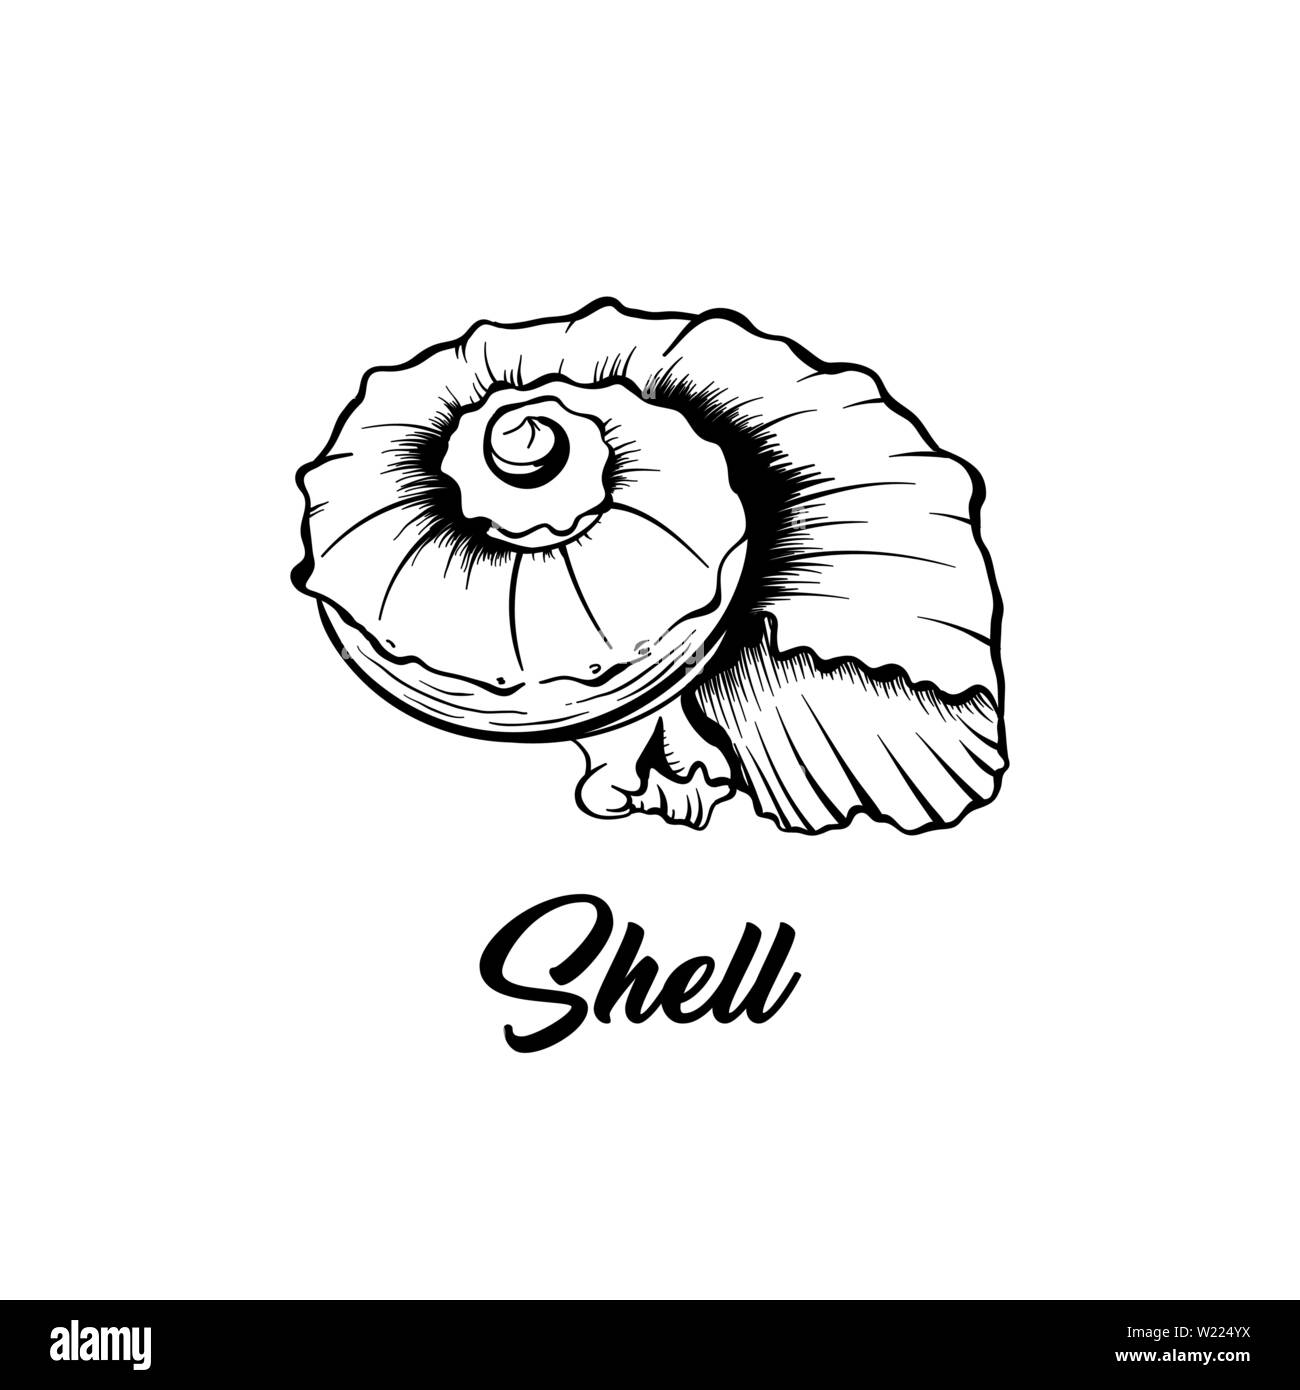 Sea shell black and white vector illustration. Spiral shaped nautical creature freehand drawing. Exotic mollusk, marine invertebrate animal engraving. Summer vacation poster design element Stock Vector